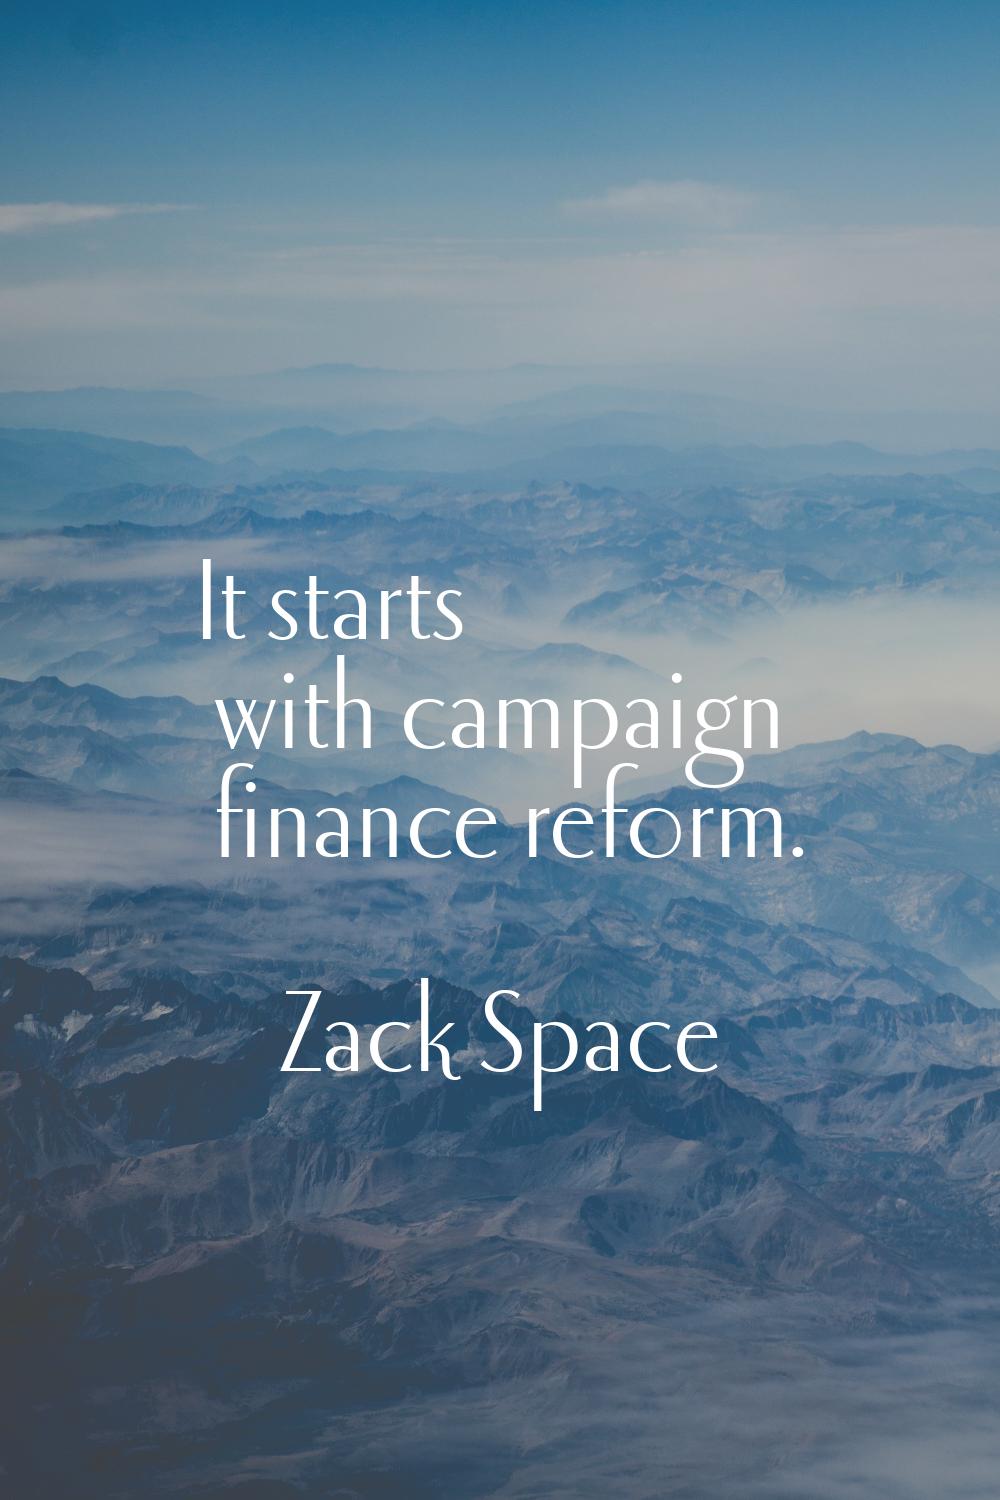 It starts with campaign finance reform.